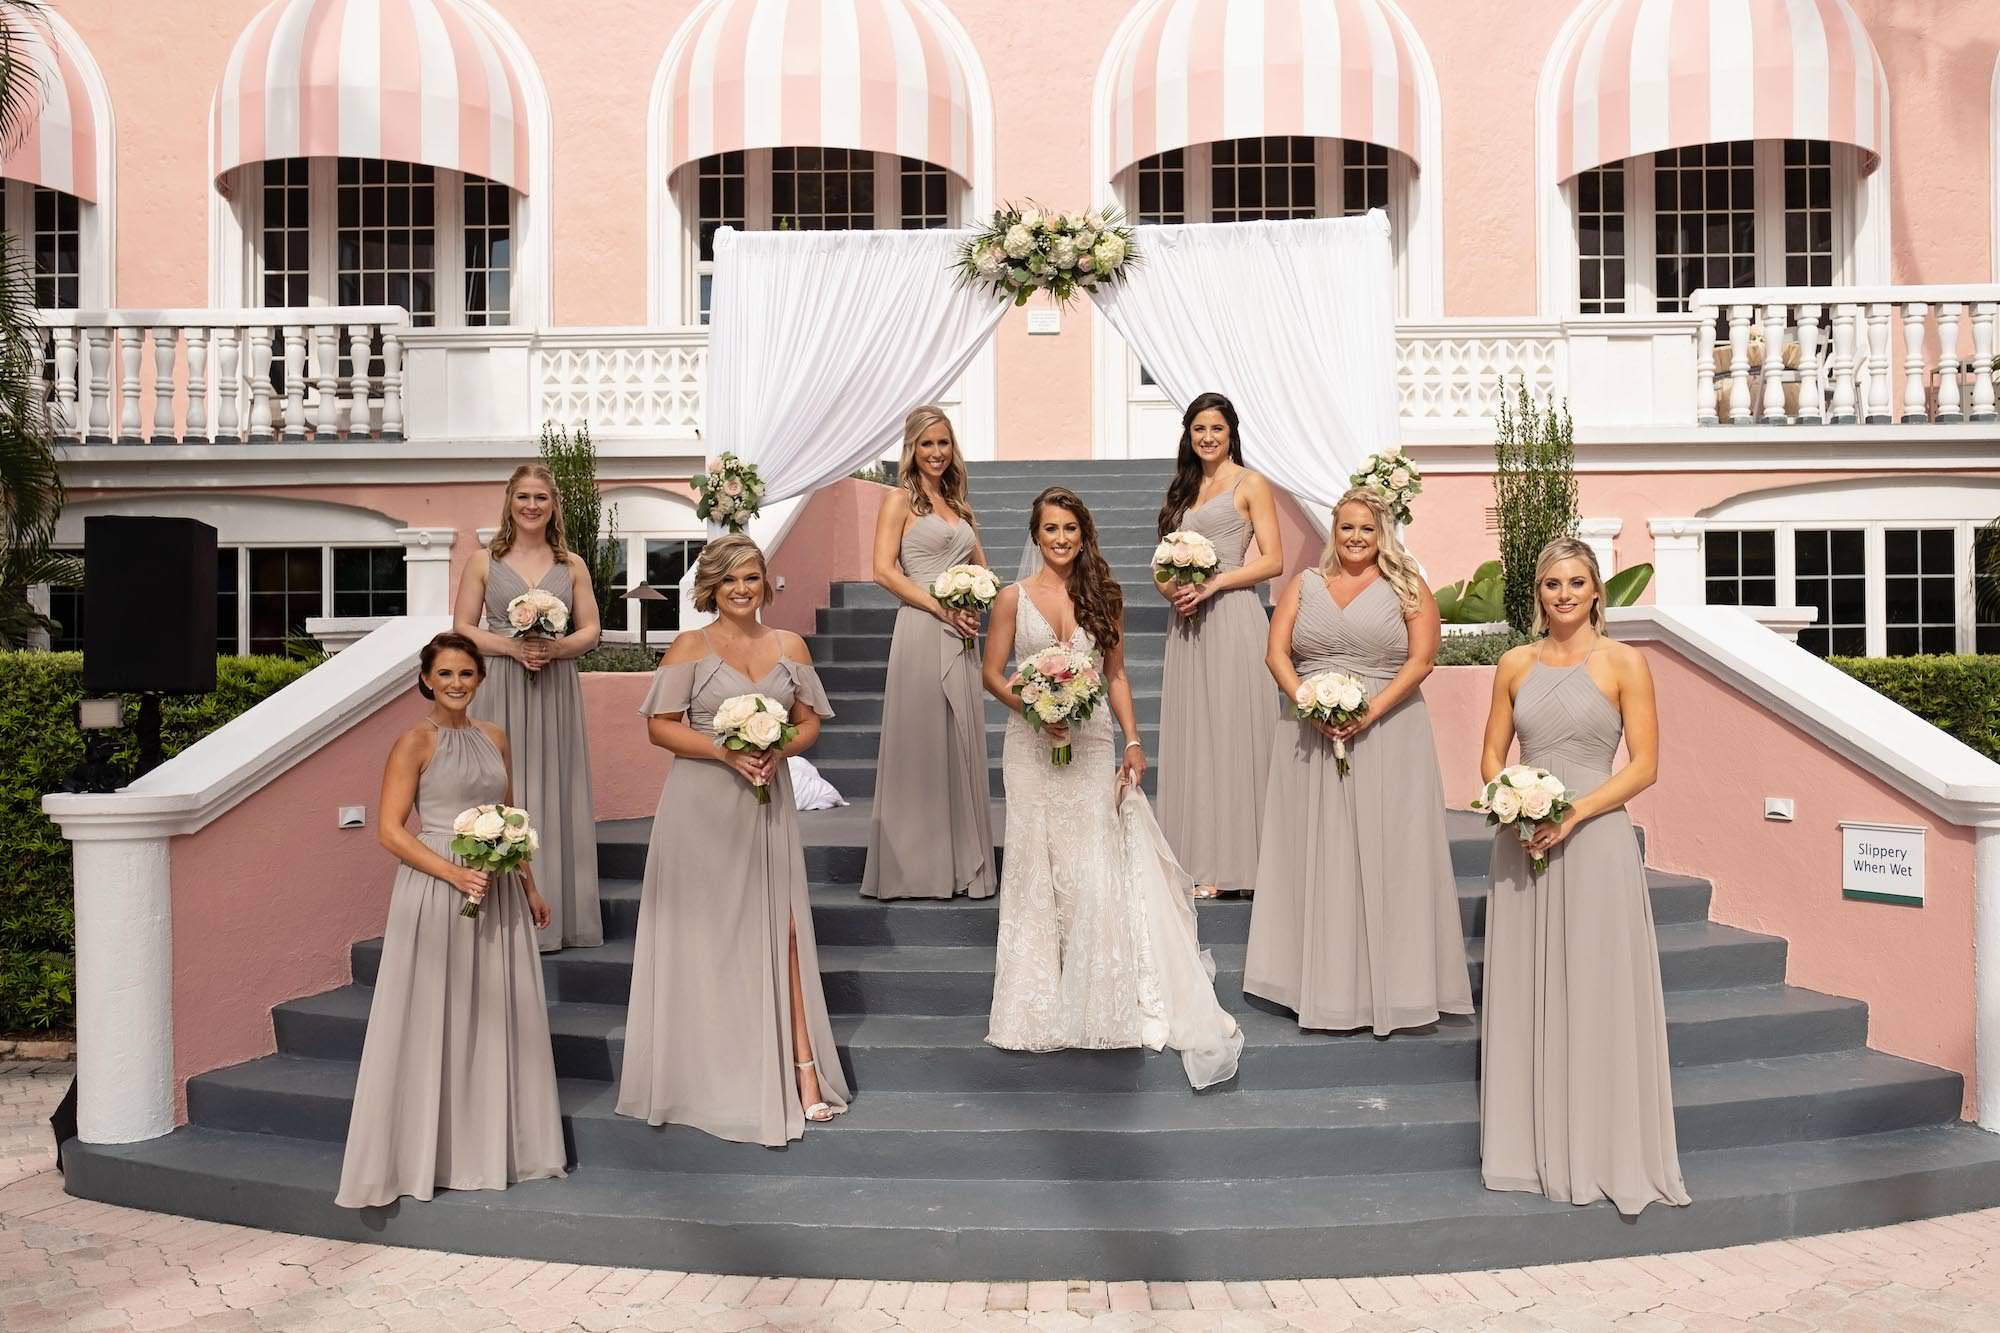 Florida Bridal Party, Bride and Bridesmaids holding Romantic White and Pink Floral Bouquet, Bride Wearing Hayley Paige Lace Overlay Fit and Flare Wedding Dress, Bridesmaids Wearing Long Beige Azazie Dresses | St. Pete Beach Historic Wedding Venue The Don CeSar Hotel